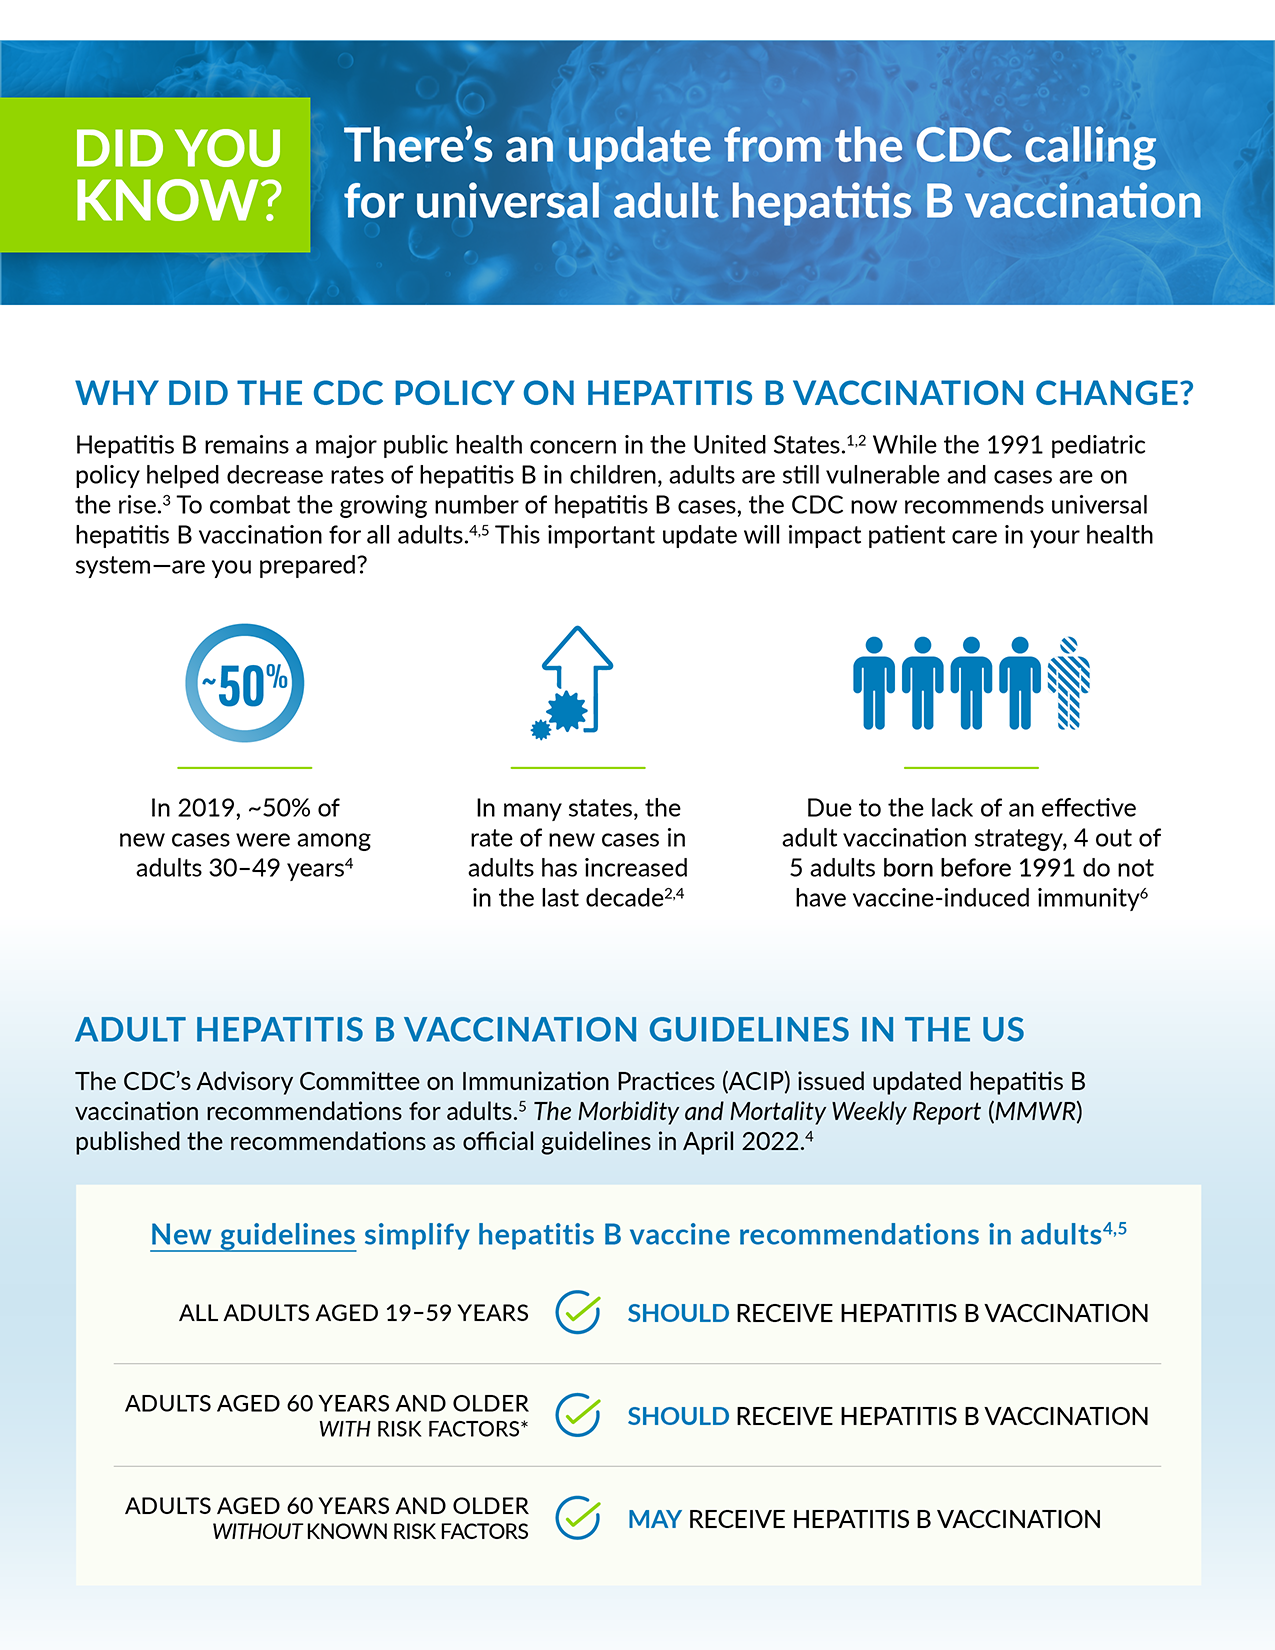 Newsletter to share the CDC adult hepatitis B vaccination recommendations with your team.